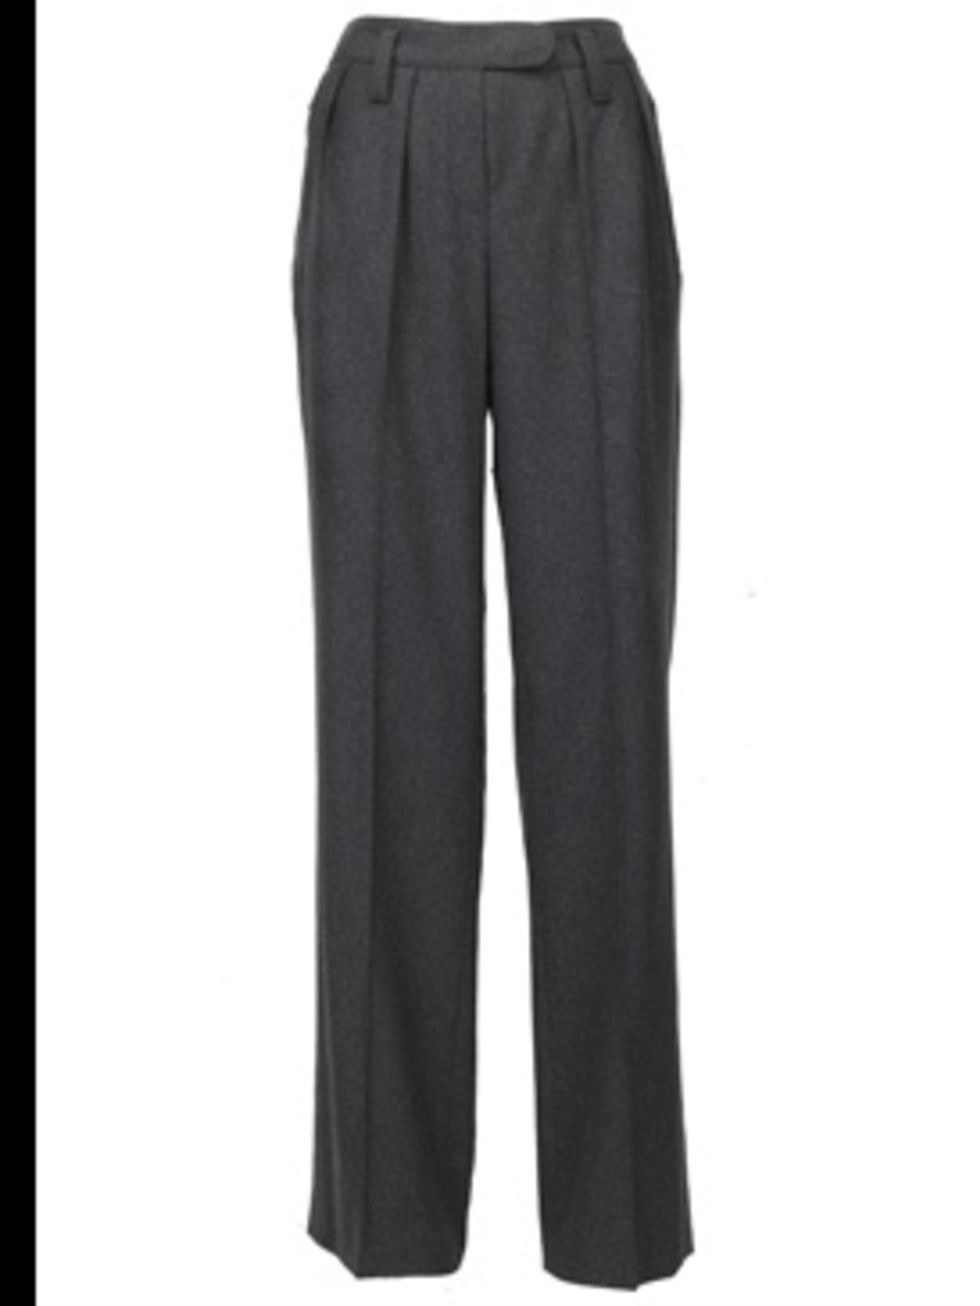 <p>Grey wool trousers, £229, by Sonia by Sonia Rykiel, available at Fenwick (0207 629 9161)</p>